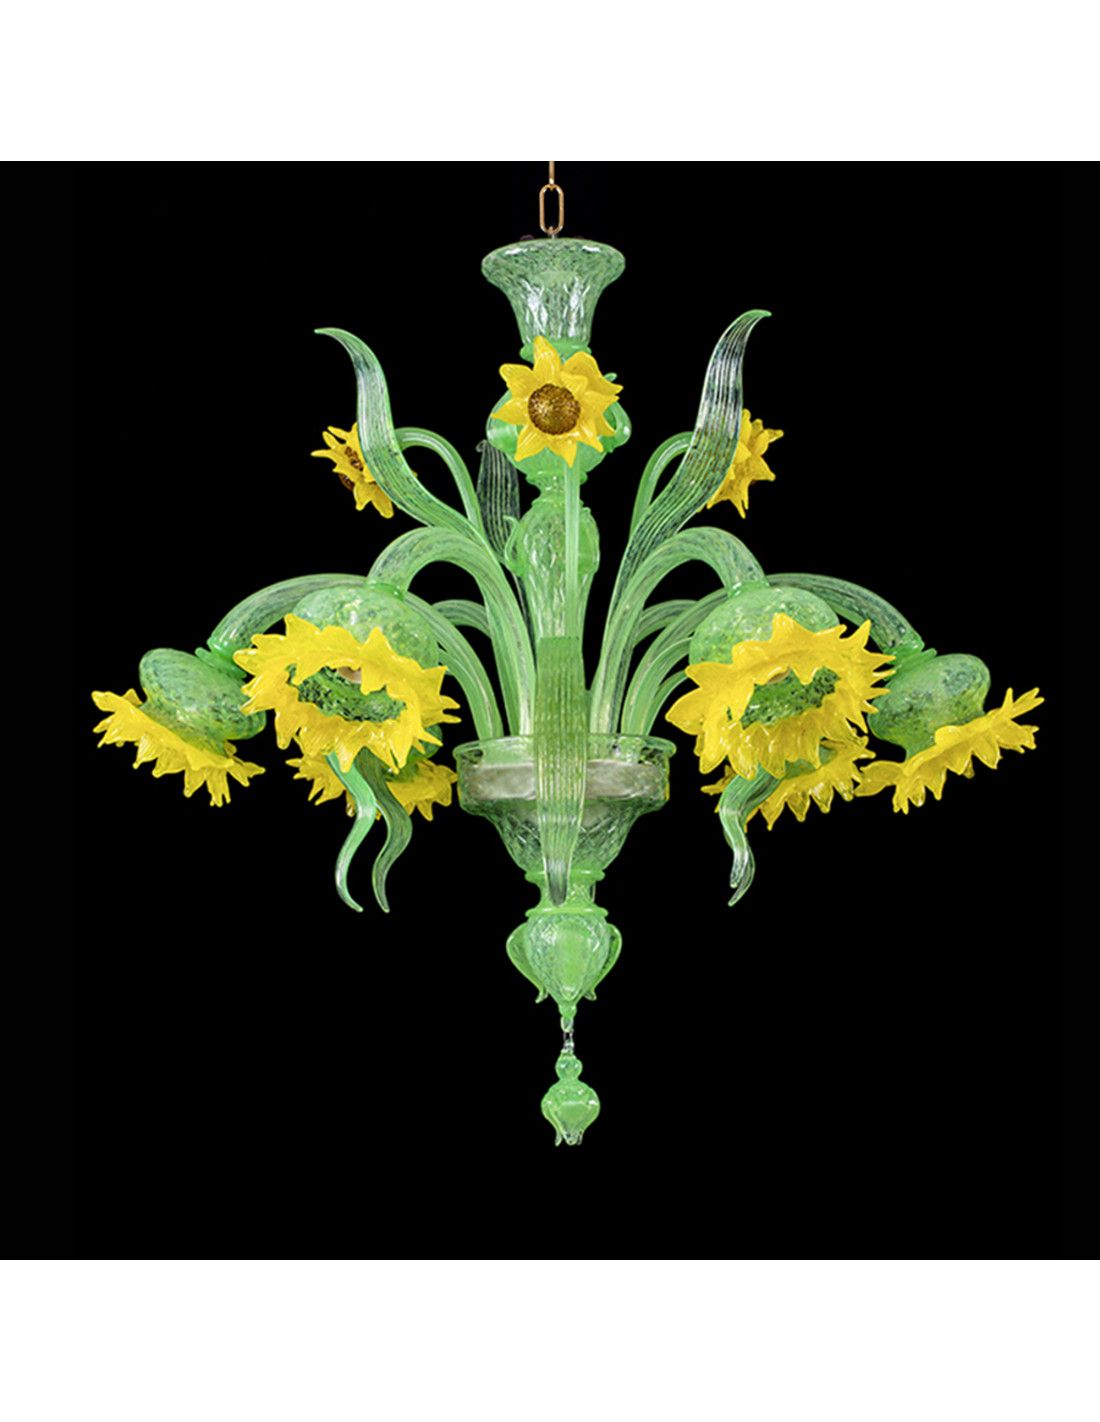 Hanging Sunflower Murano Chandelier Within Current Hanging Sunflower (View 14 of 20)